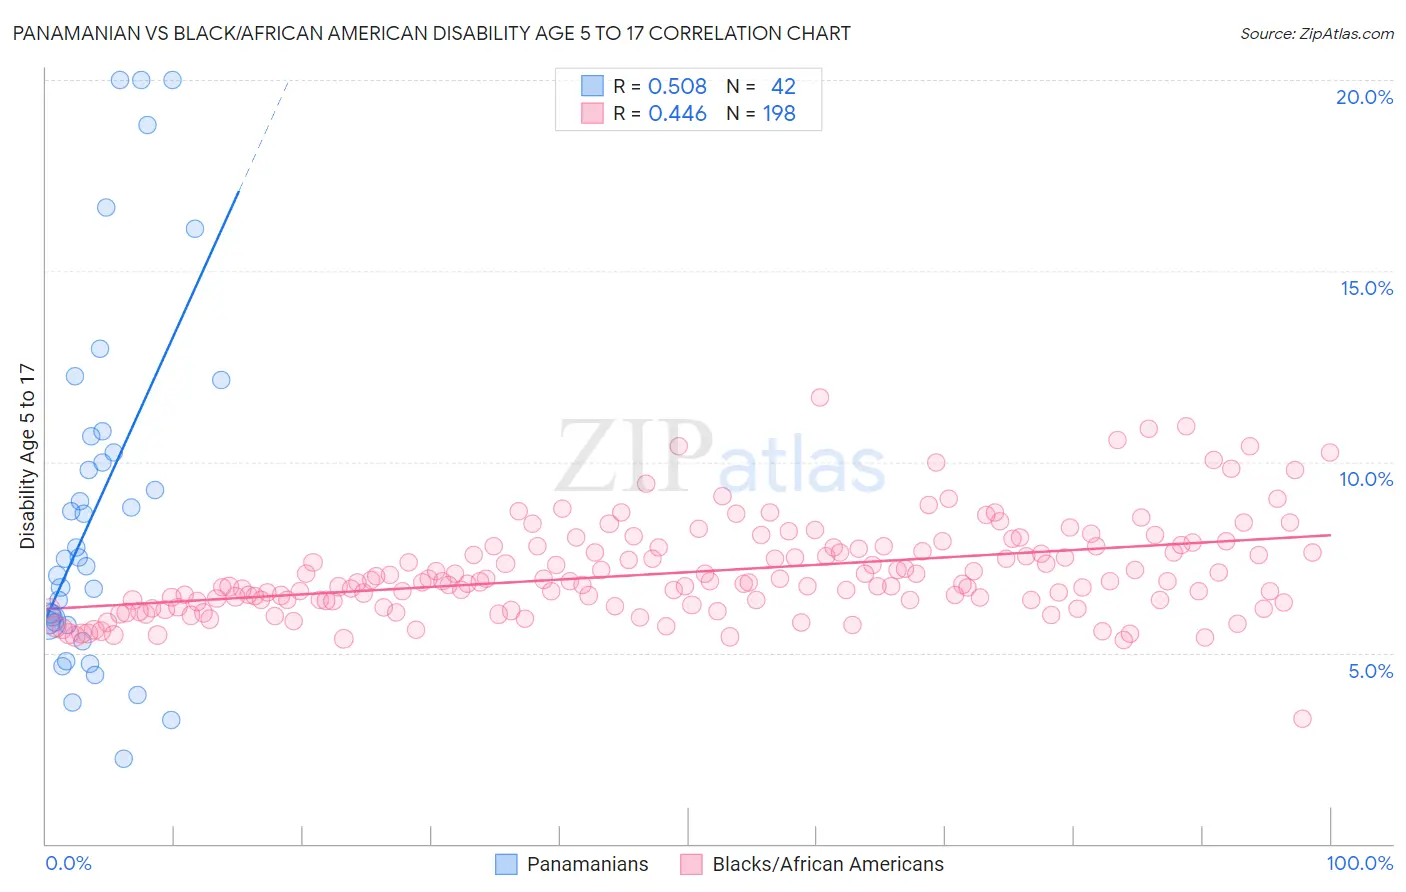 Panamanian vs Black/African American Disability Age 5 to 17